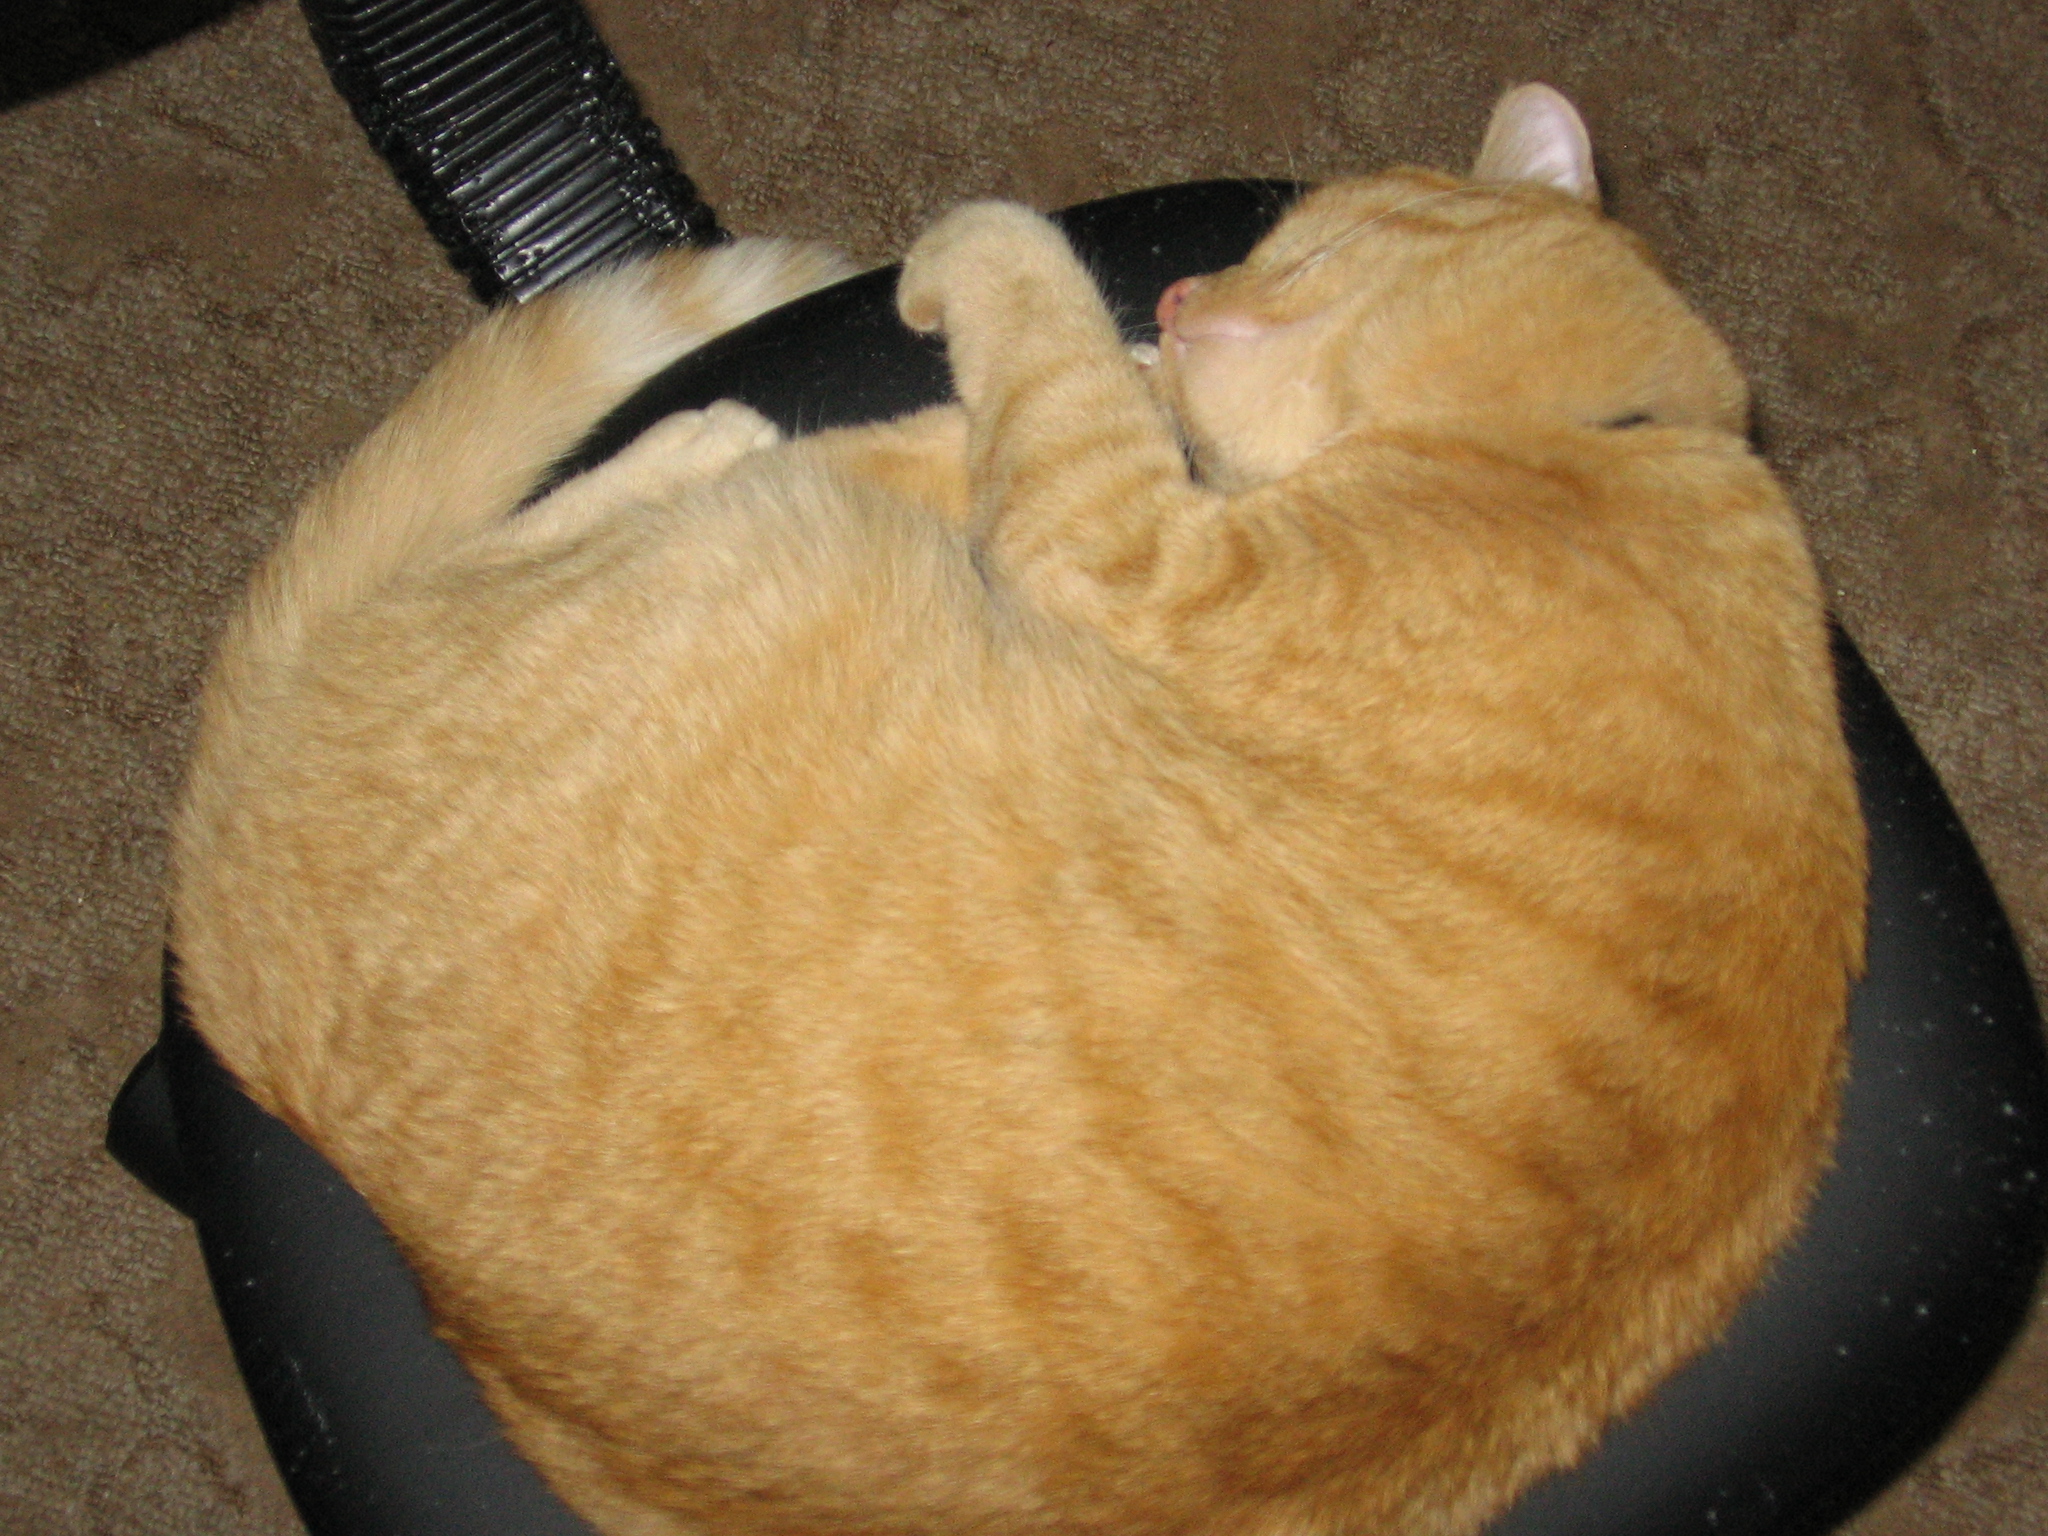 Jack curled up on a black rotating computer chair, looking like a big orange ball.